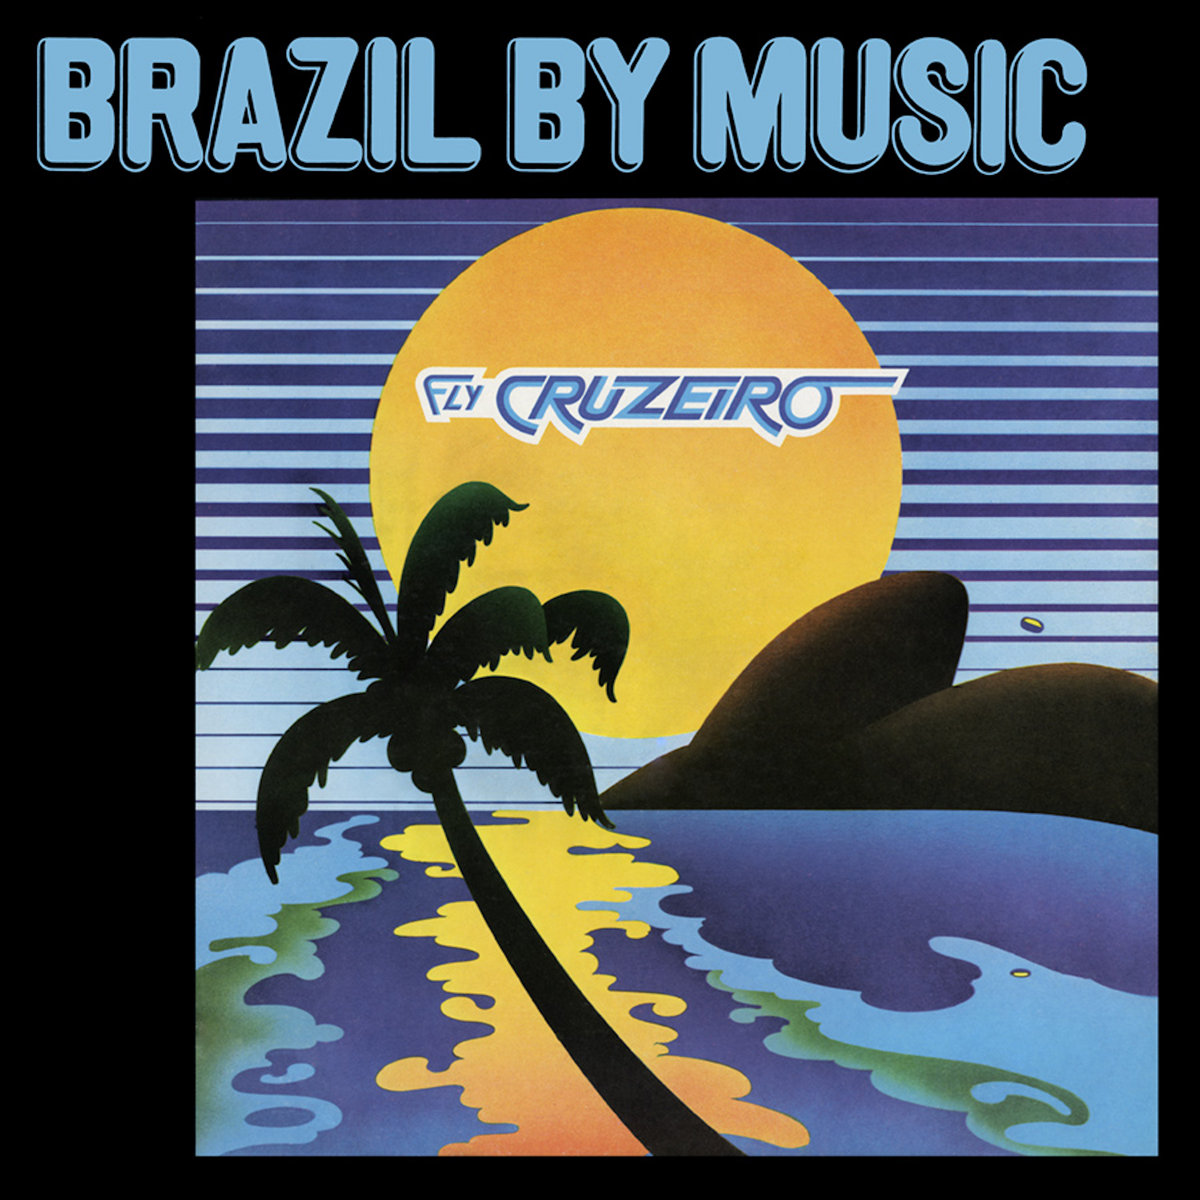 a1471081684_10 Marcos Valle & Azymut – Fly Cruzeiro (1972)